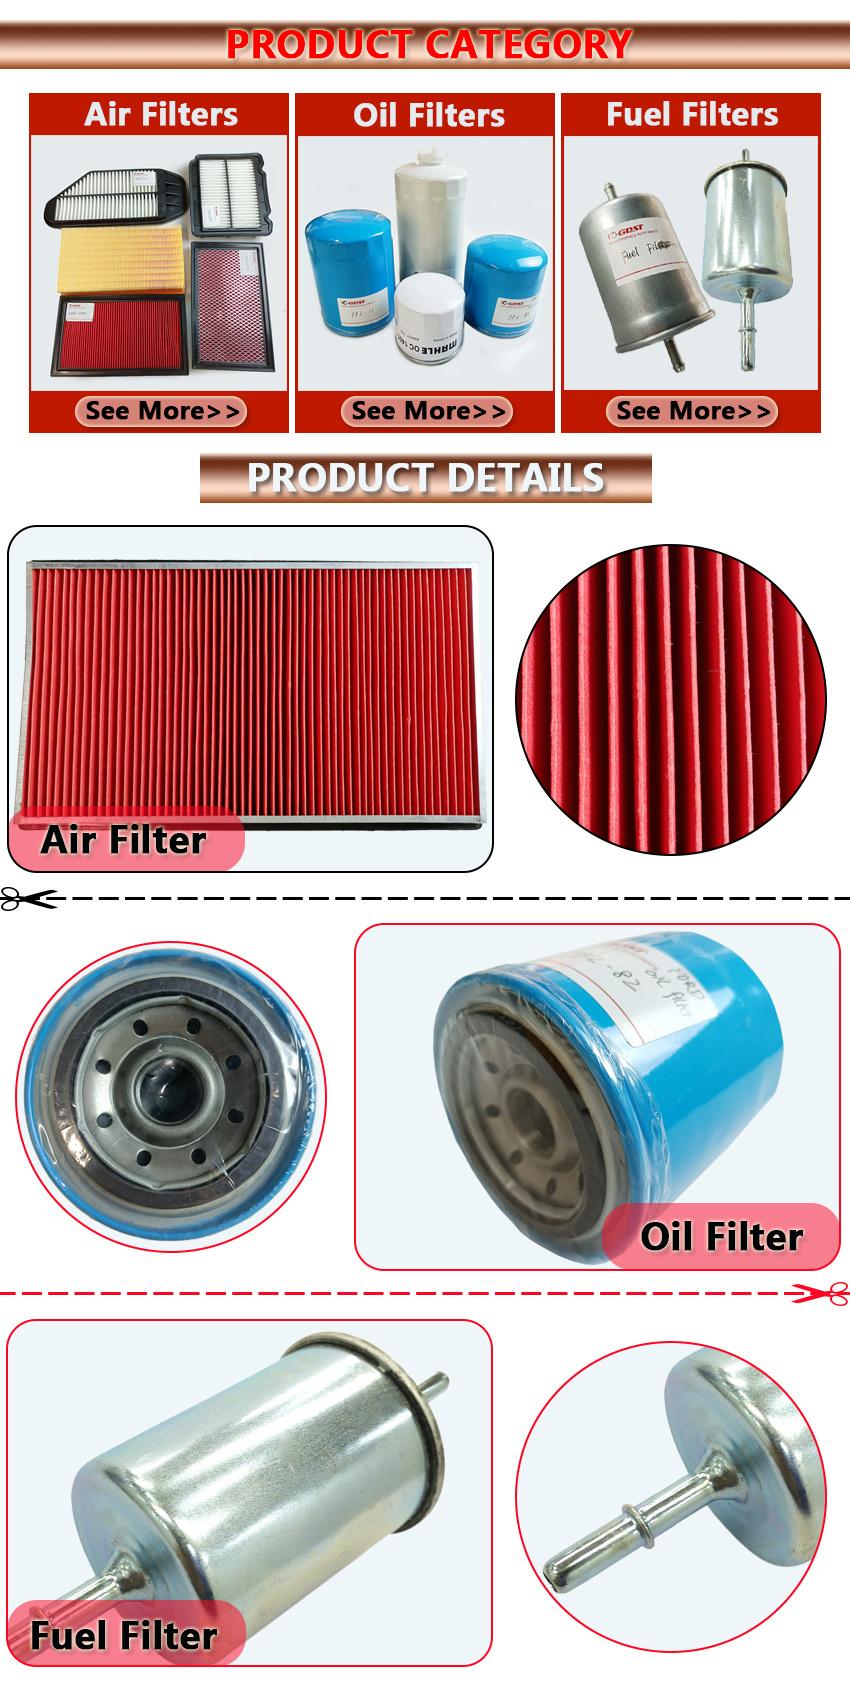 Gdst Manufacturing Wholesale High Efficiency Air Conditioning Filter for Car